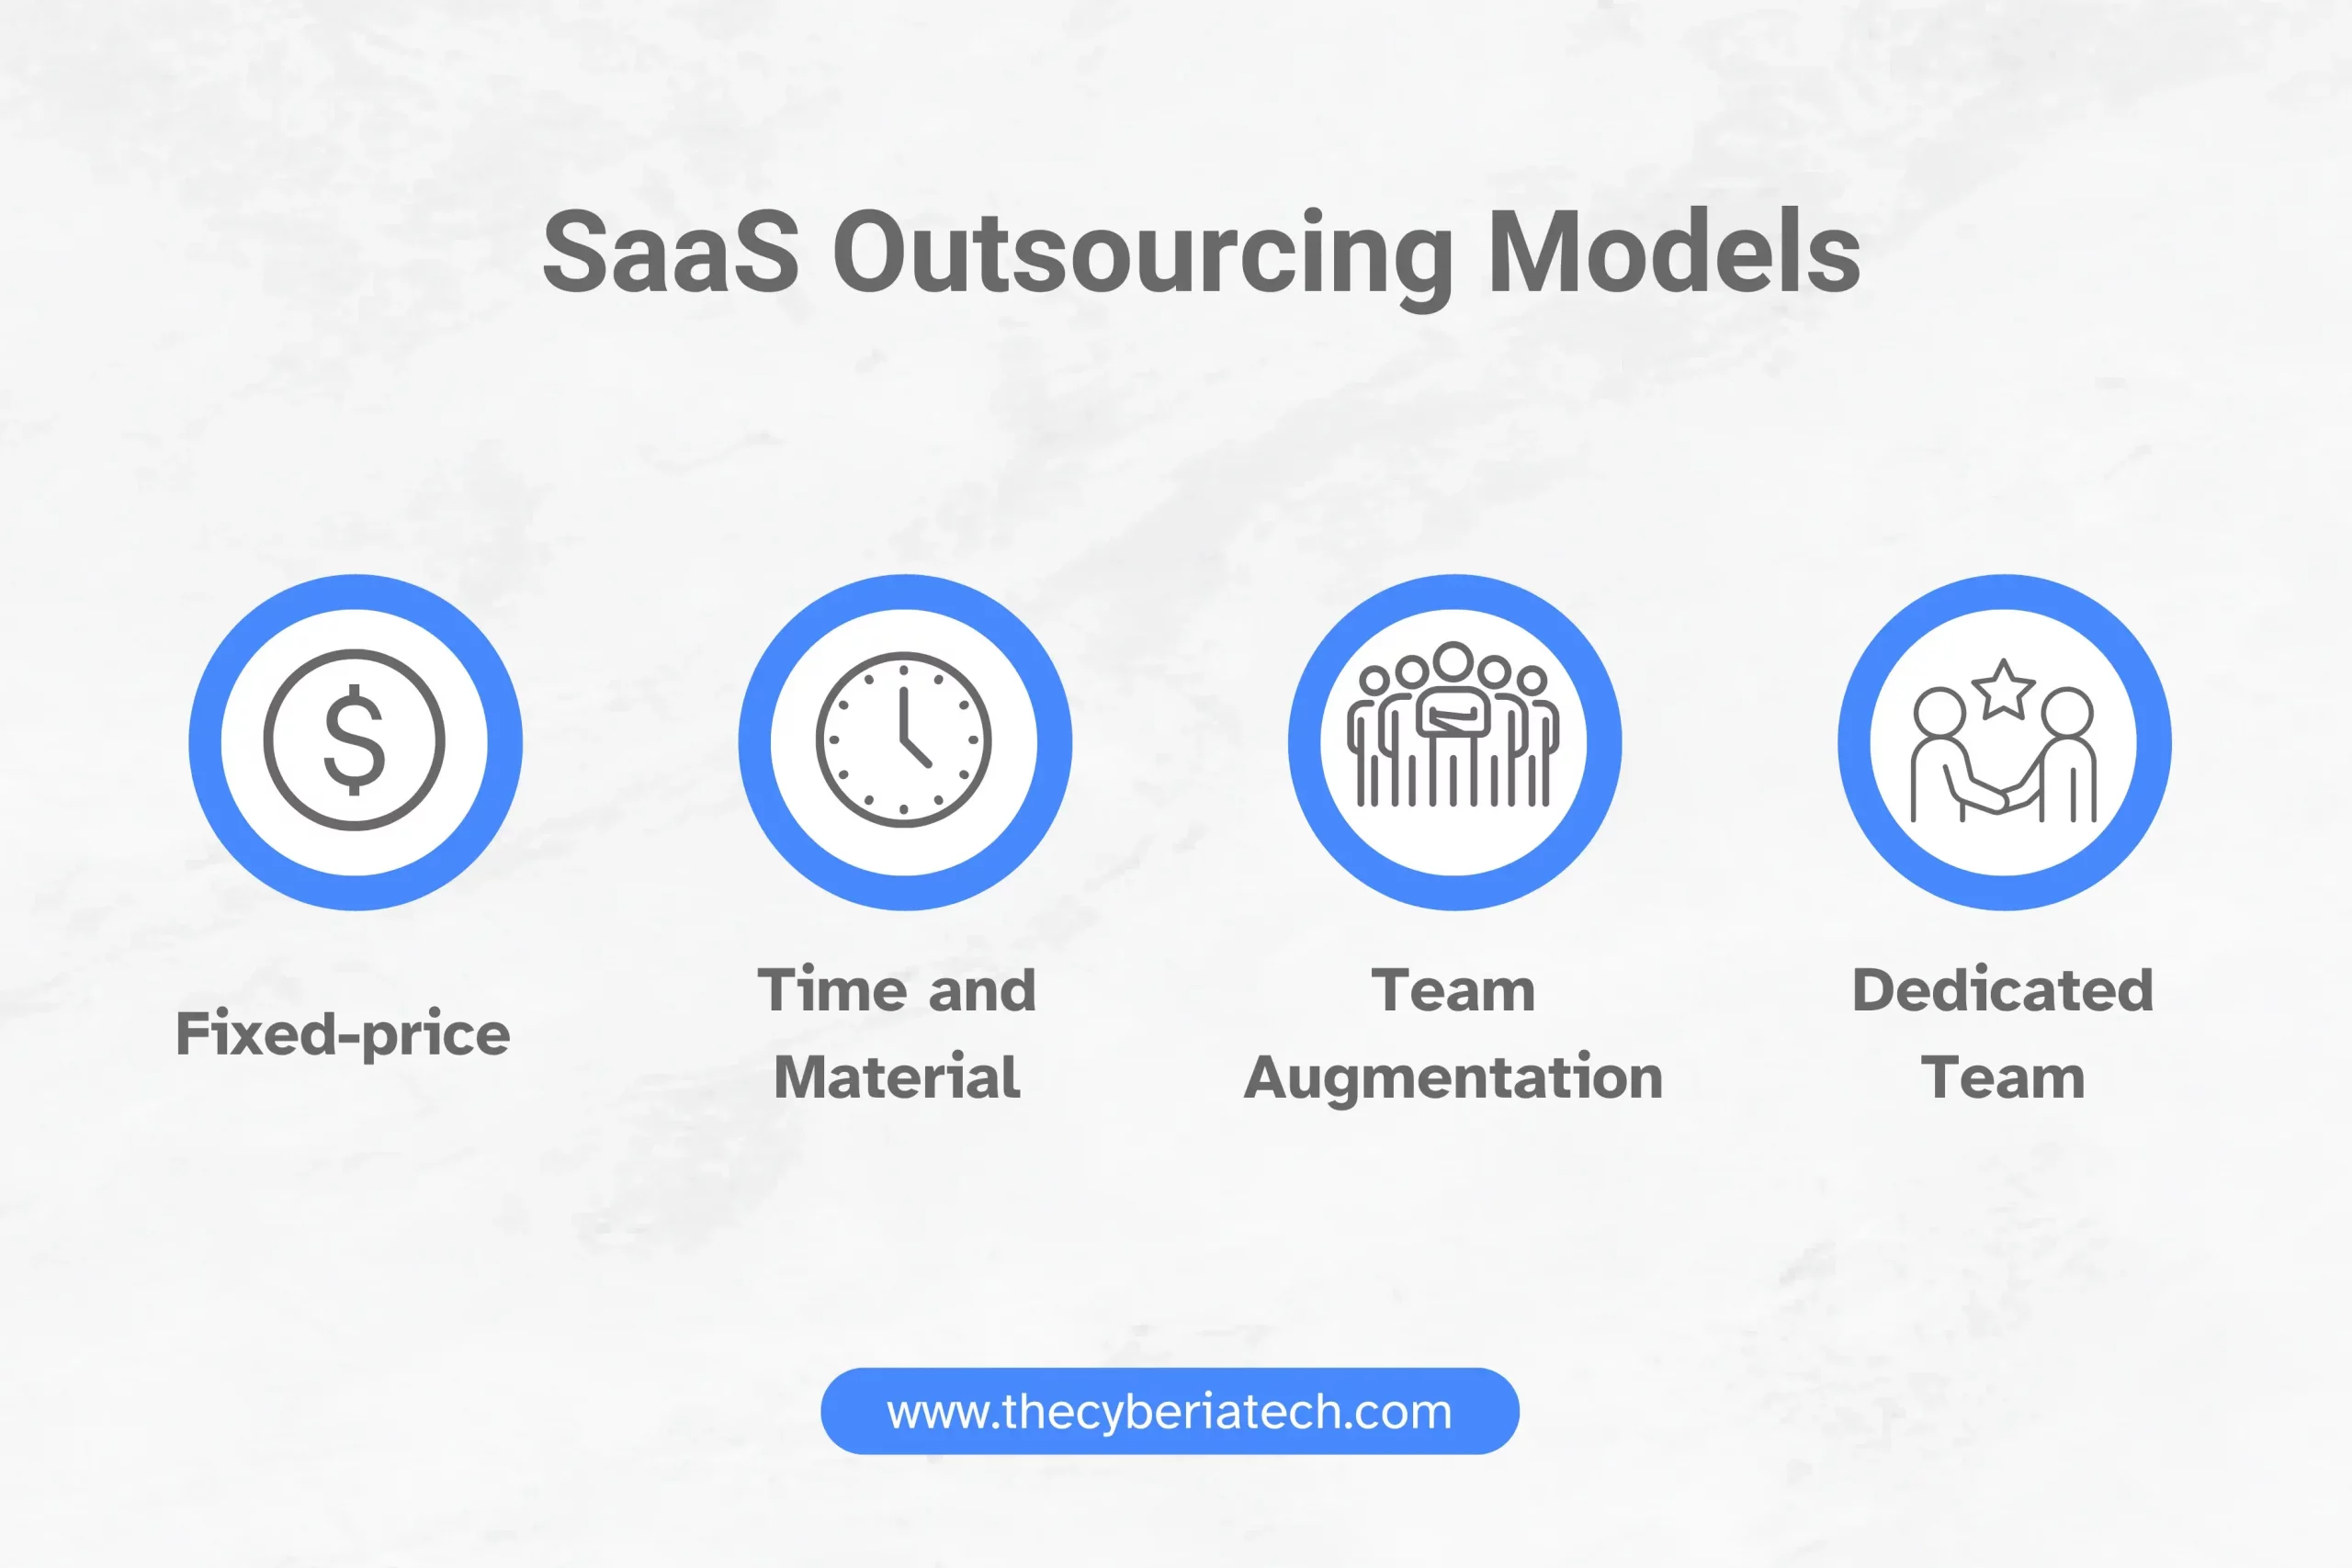 Common outsourcing models